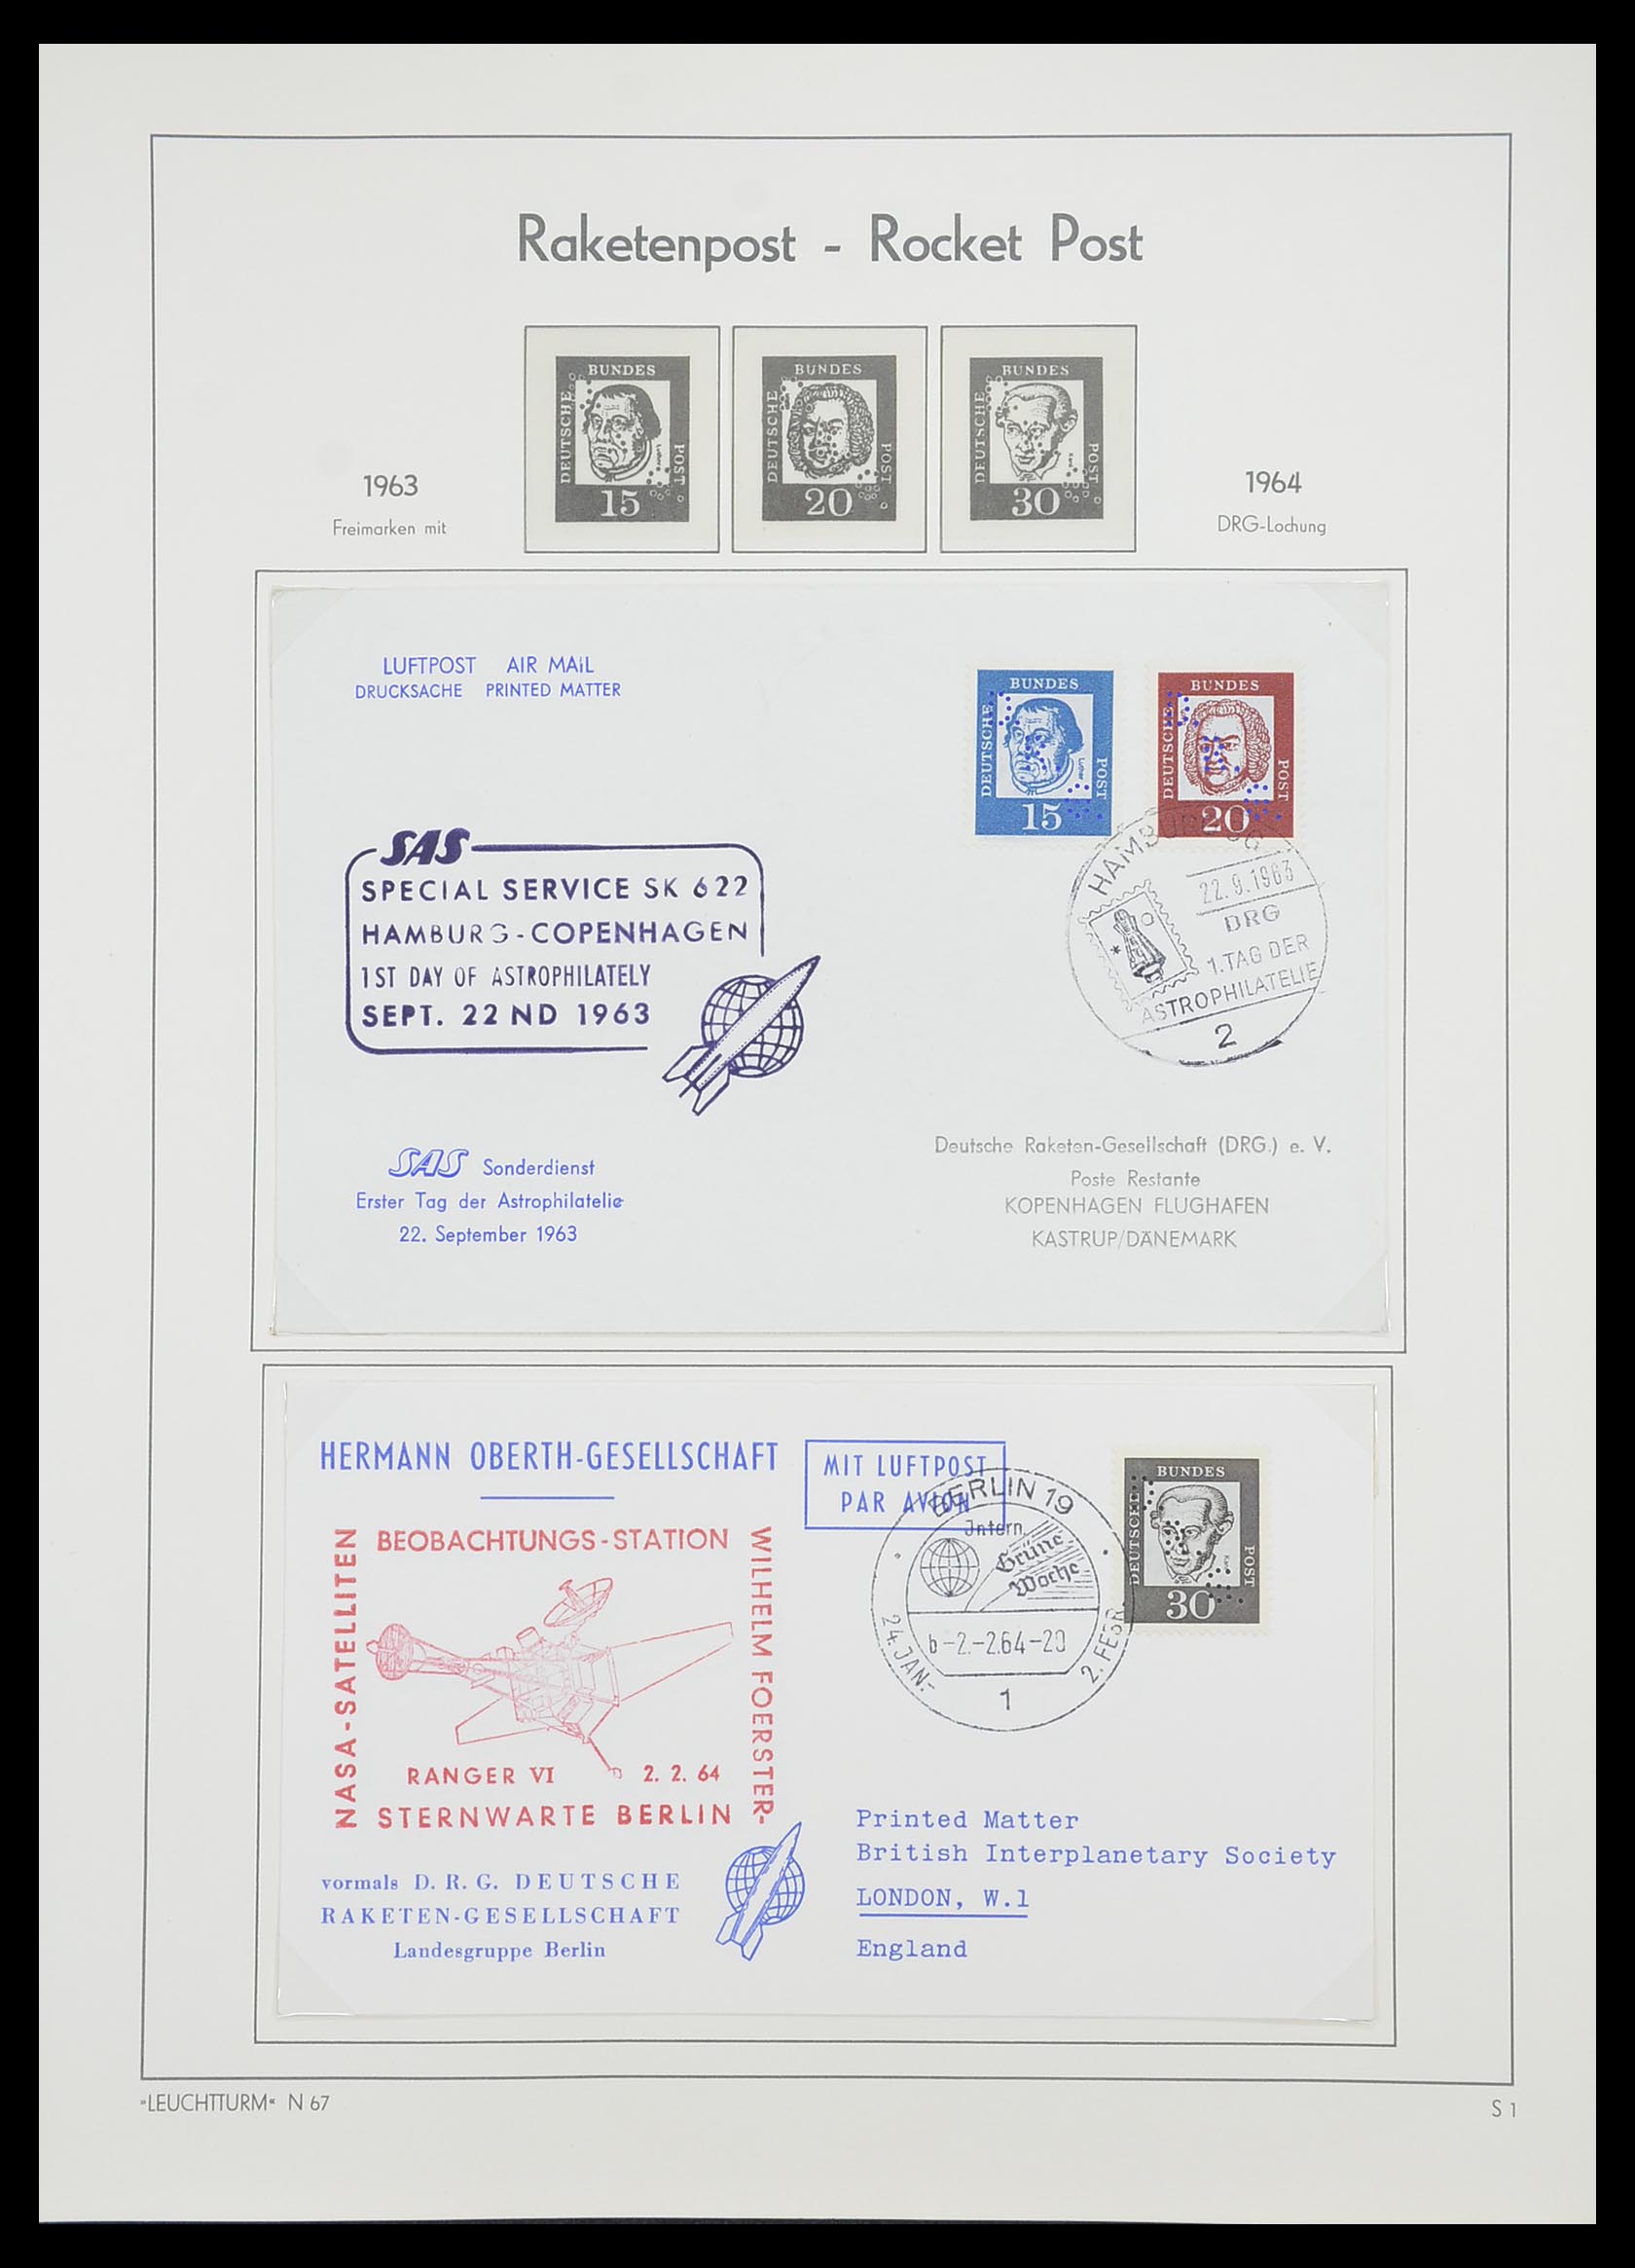 33463 073 - Stamp collection 33463 Rocket mail covers.